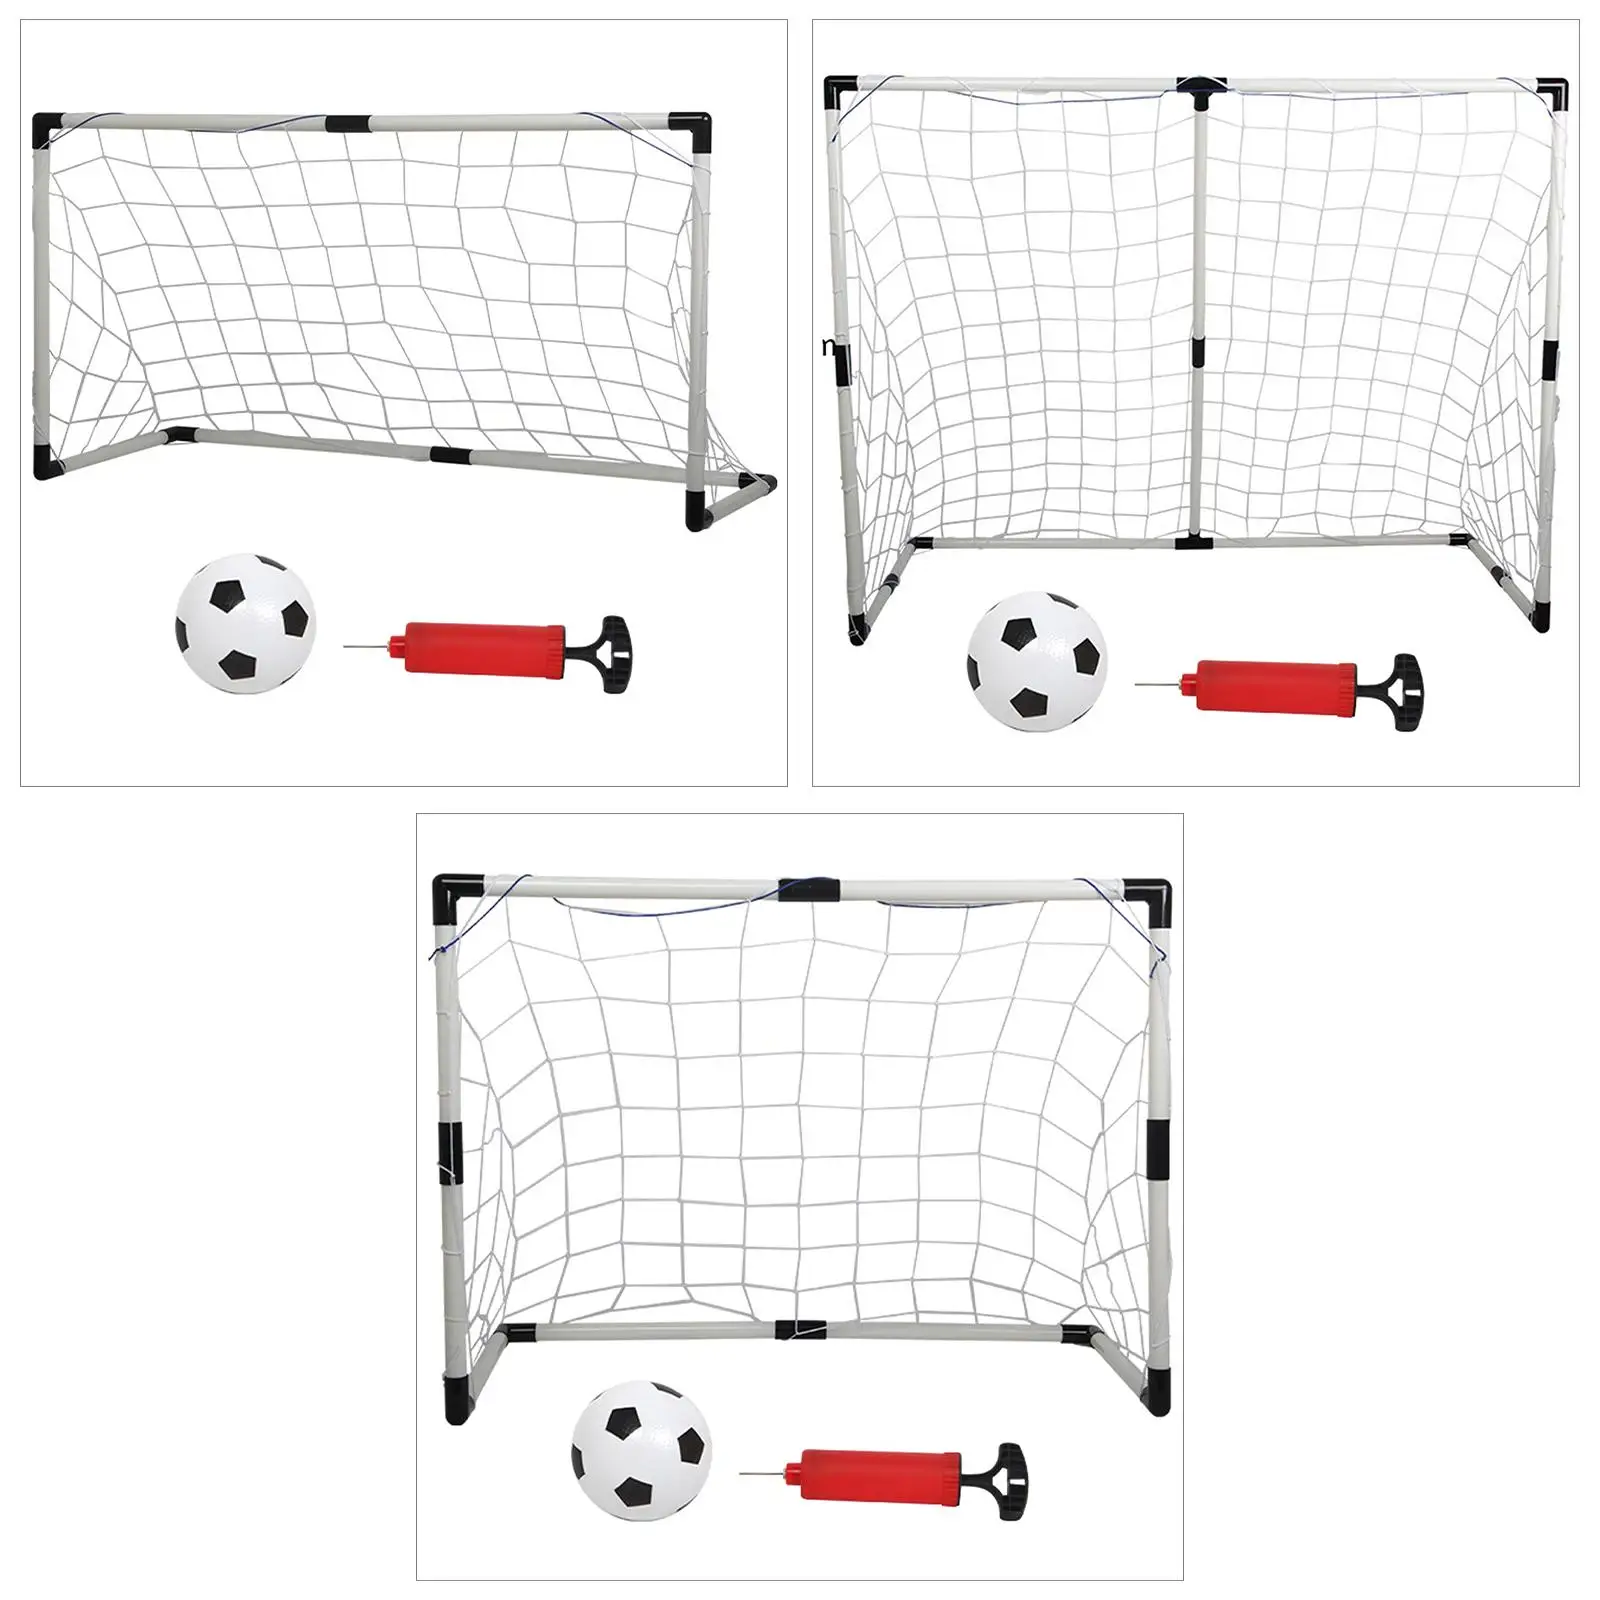 Children Football Goal   Toys , Easy to Disassemble for Storage and Portability Soccer Accessories Lawn Activities